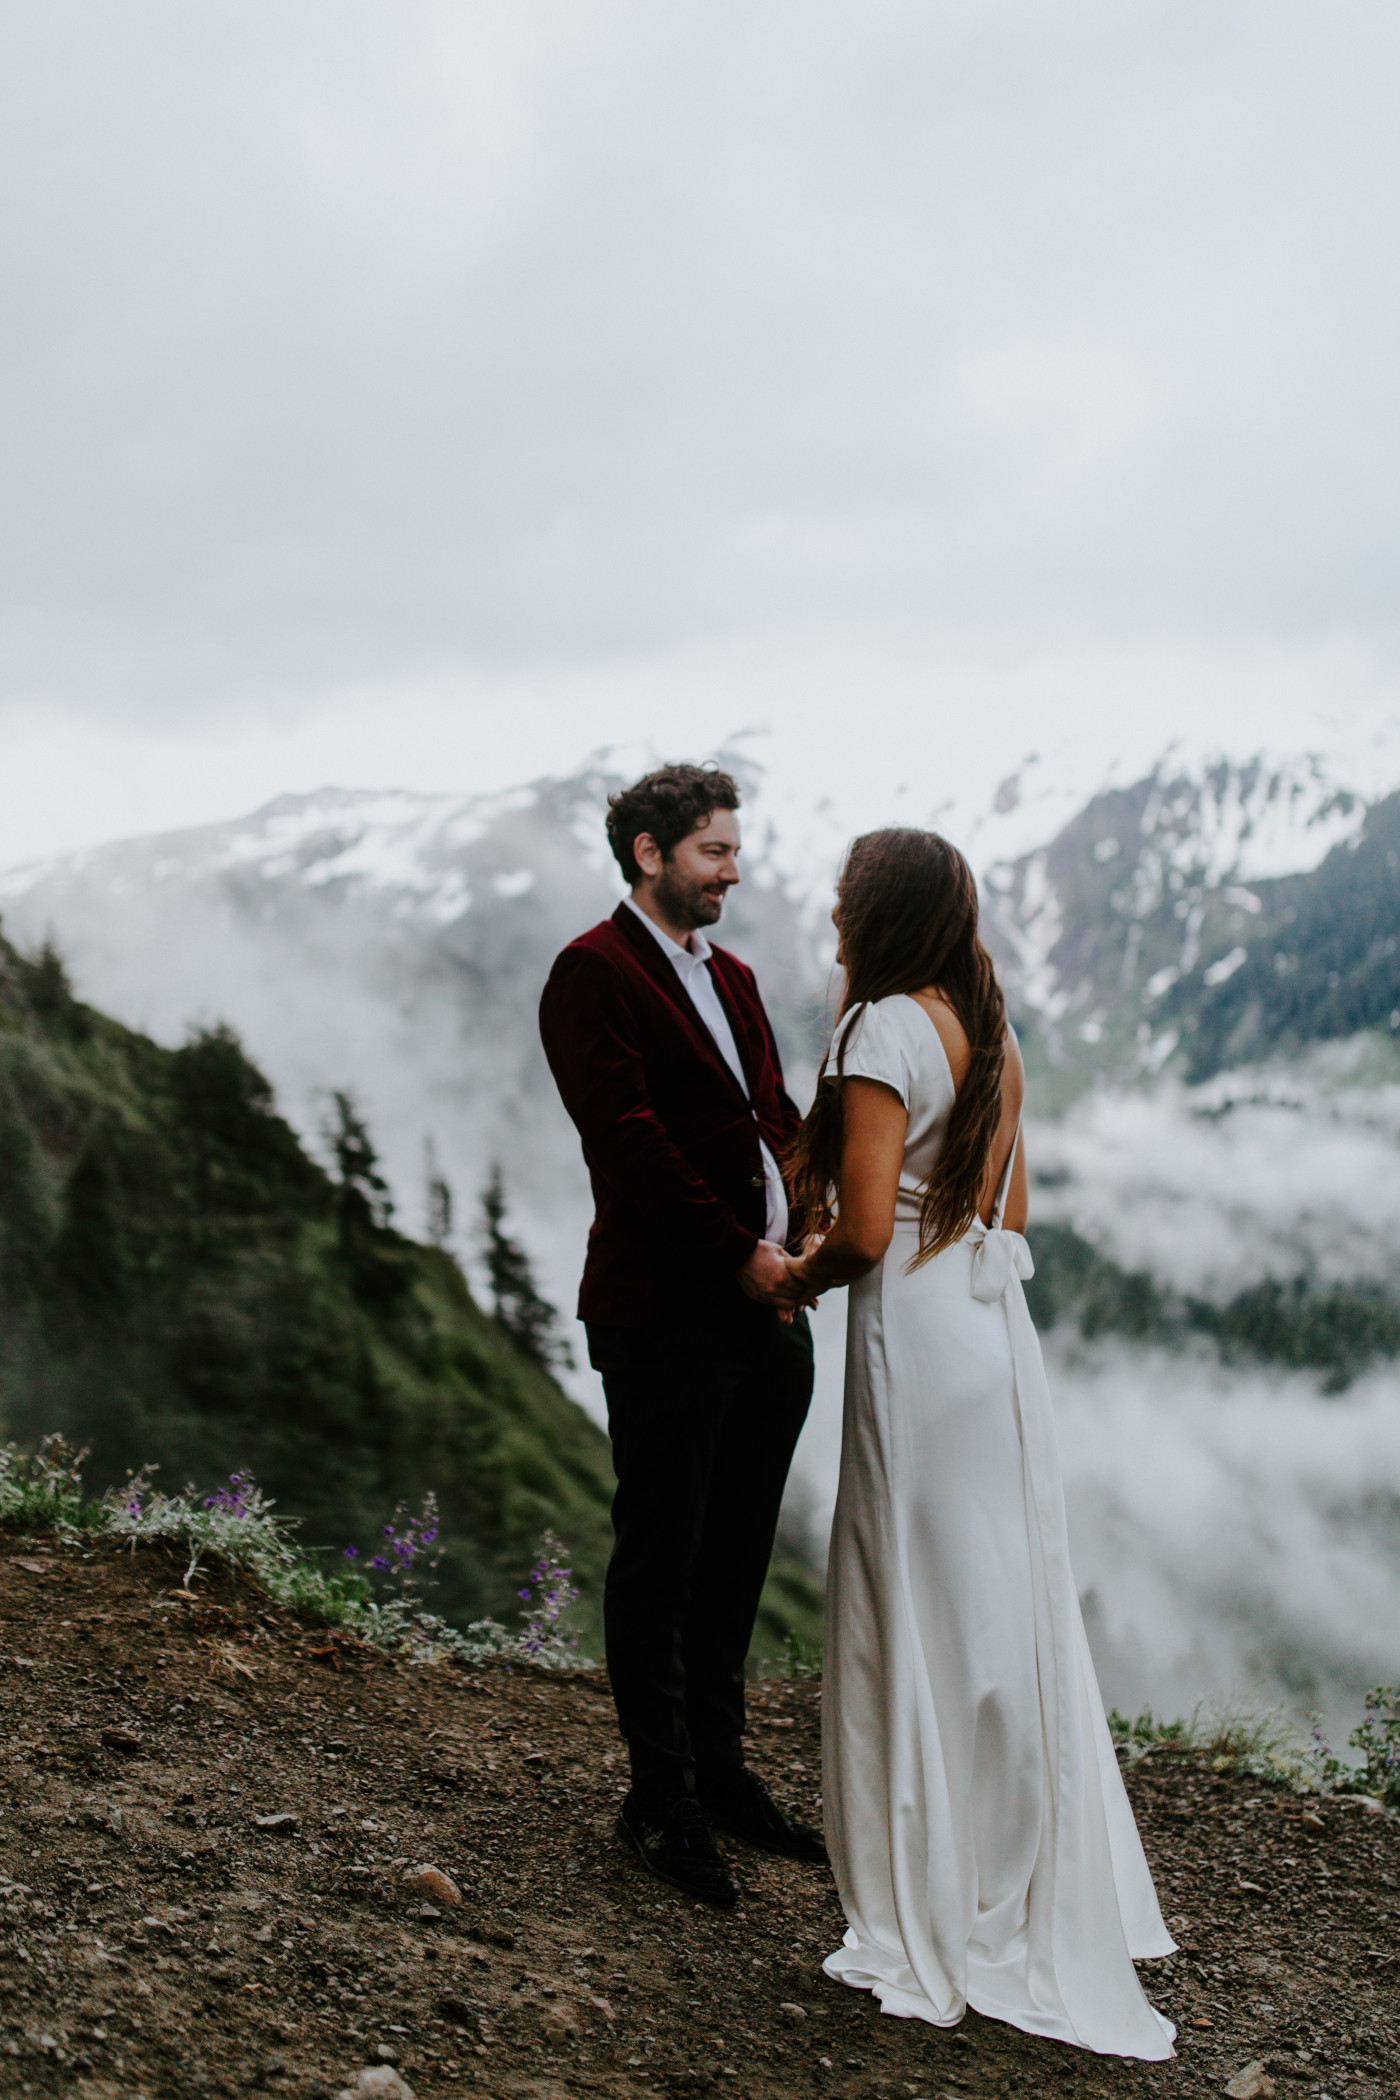 Murray and Katelyn stand in front of Mount Hood during their elopement ceremony. Elopement wedding photography at Mount Hood by Sienna Plus Josh.